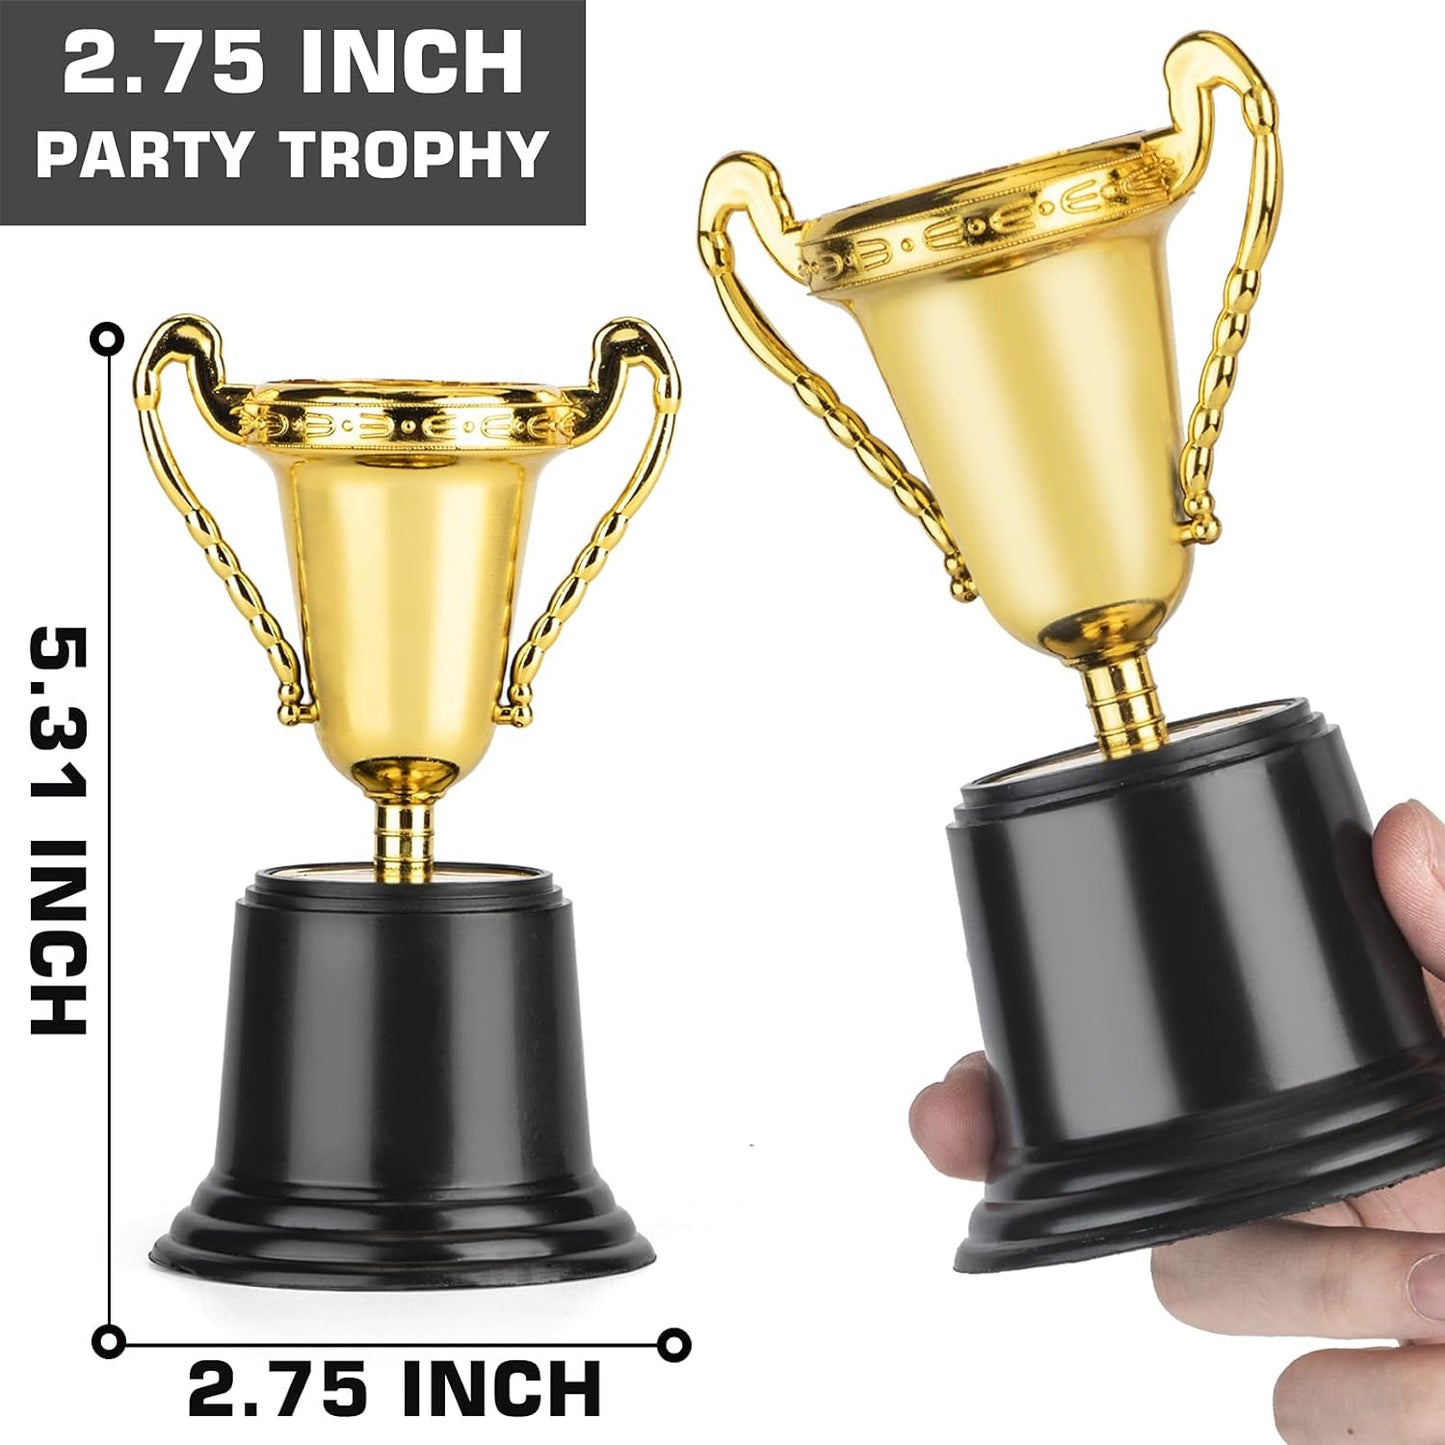 24 Pack Gold Award Trophy, 5 Inch Plastic Golden Mini Trophies Cup for Halloween Party Favors, Kids Classroom School Rewards, Competition or Celebration Awards Props, Sports Tournament Winning Prizes